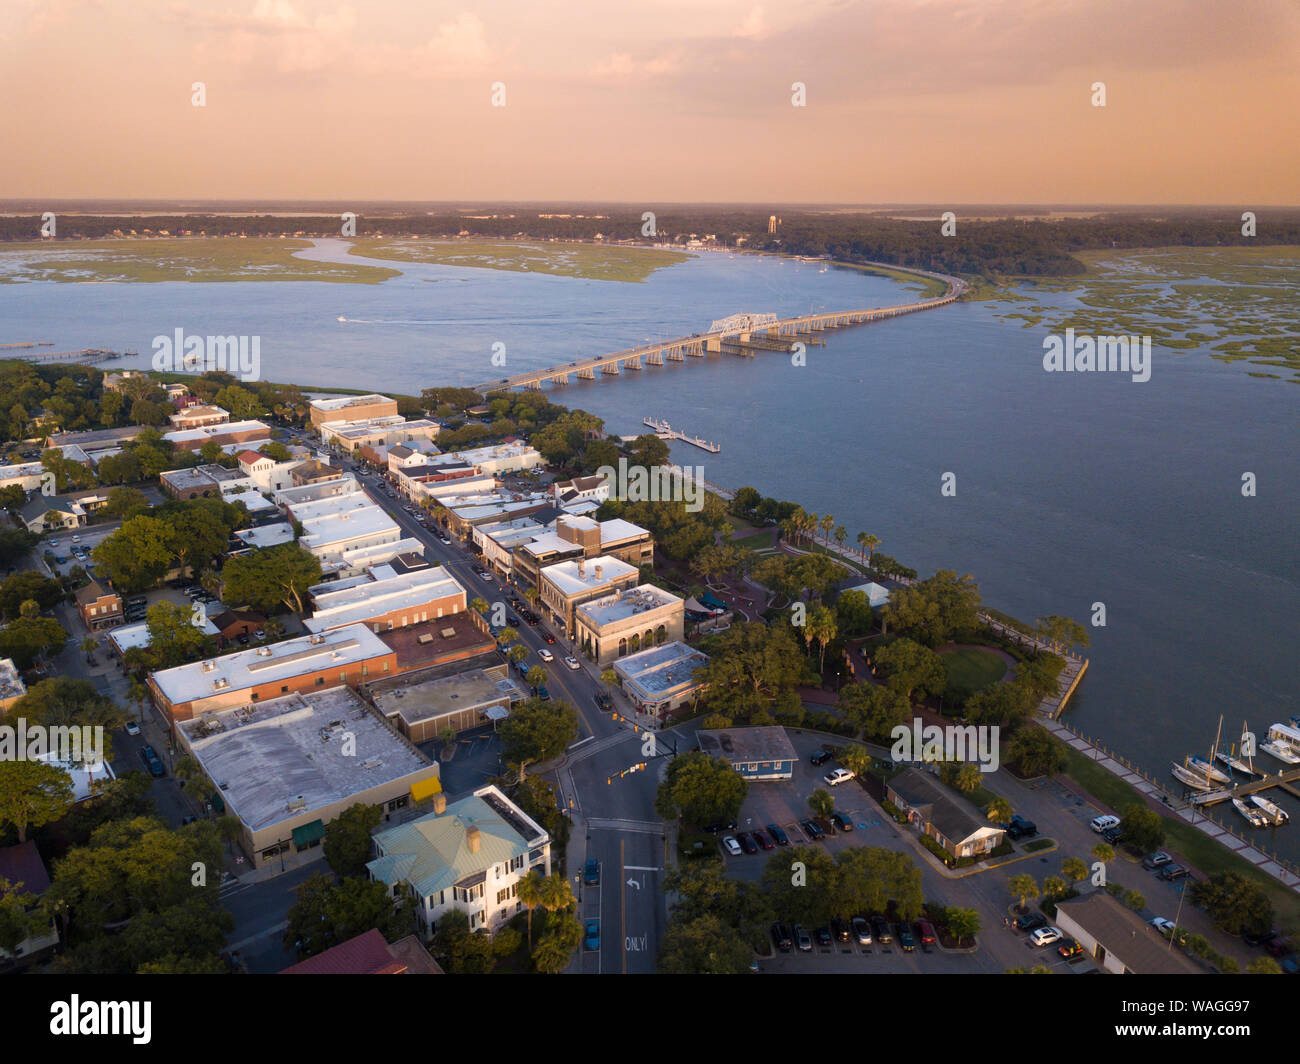 Aerial view of downtown Beaufort, South Carolina and river at sunset. Stock Photo